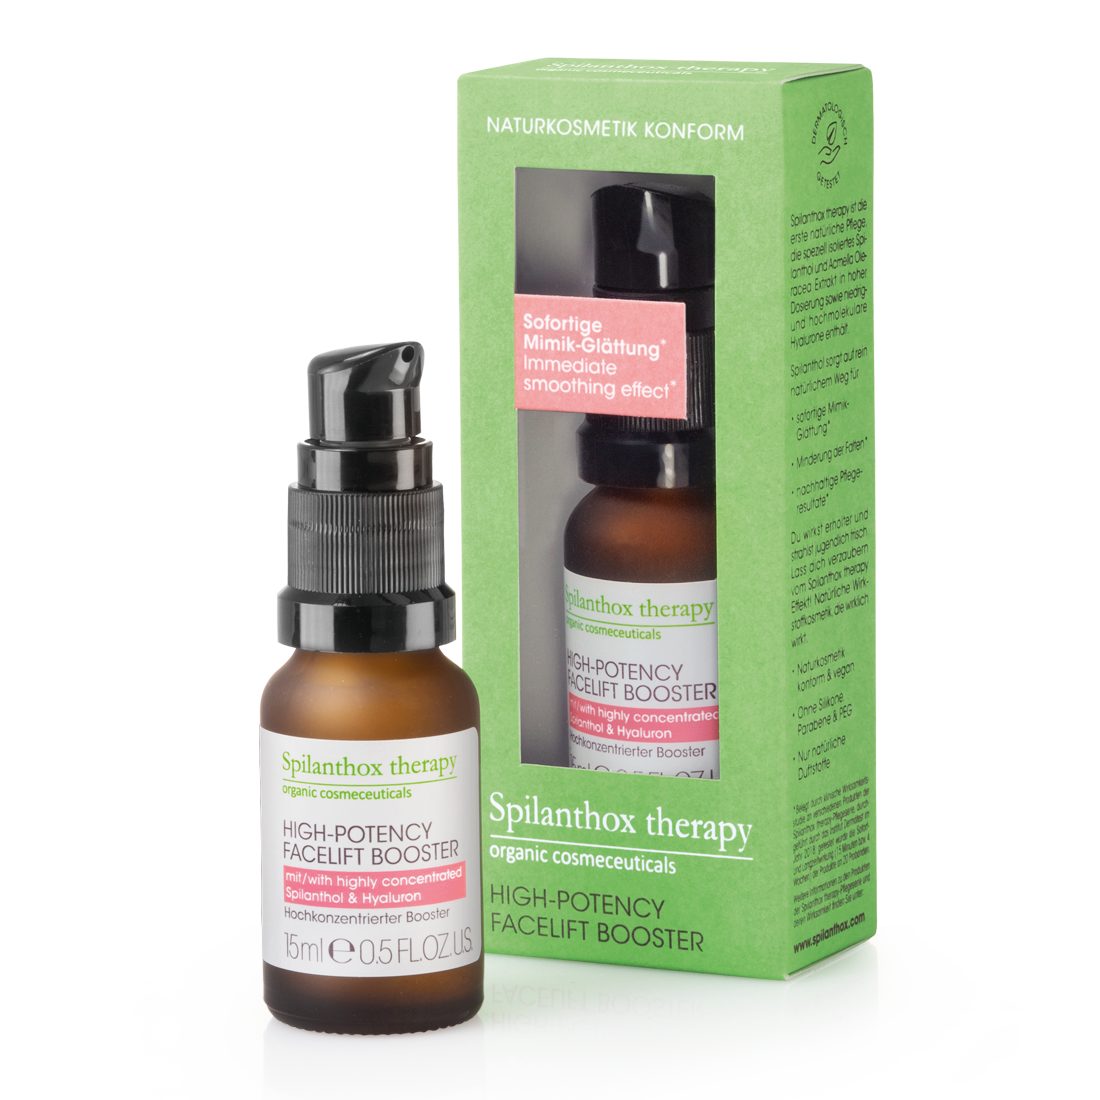 Spilanthox therapy Gesichtspflege High-Potency Facelift Booster